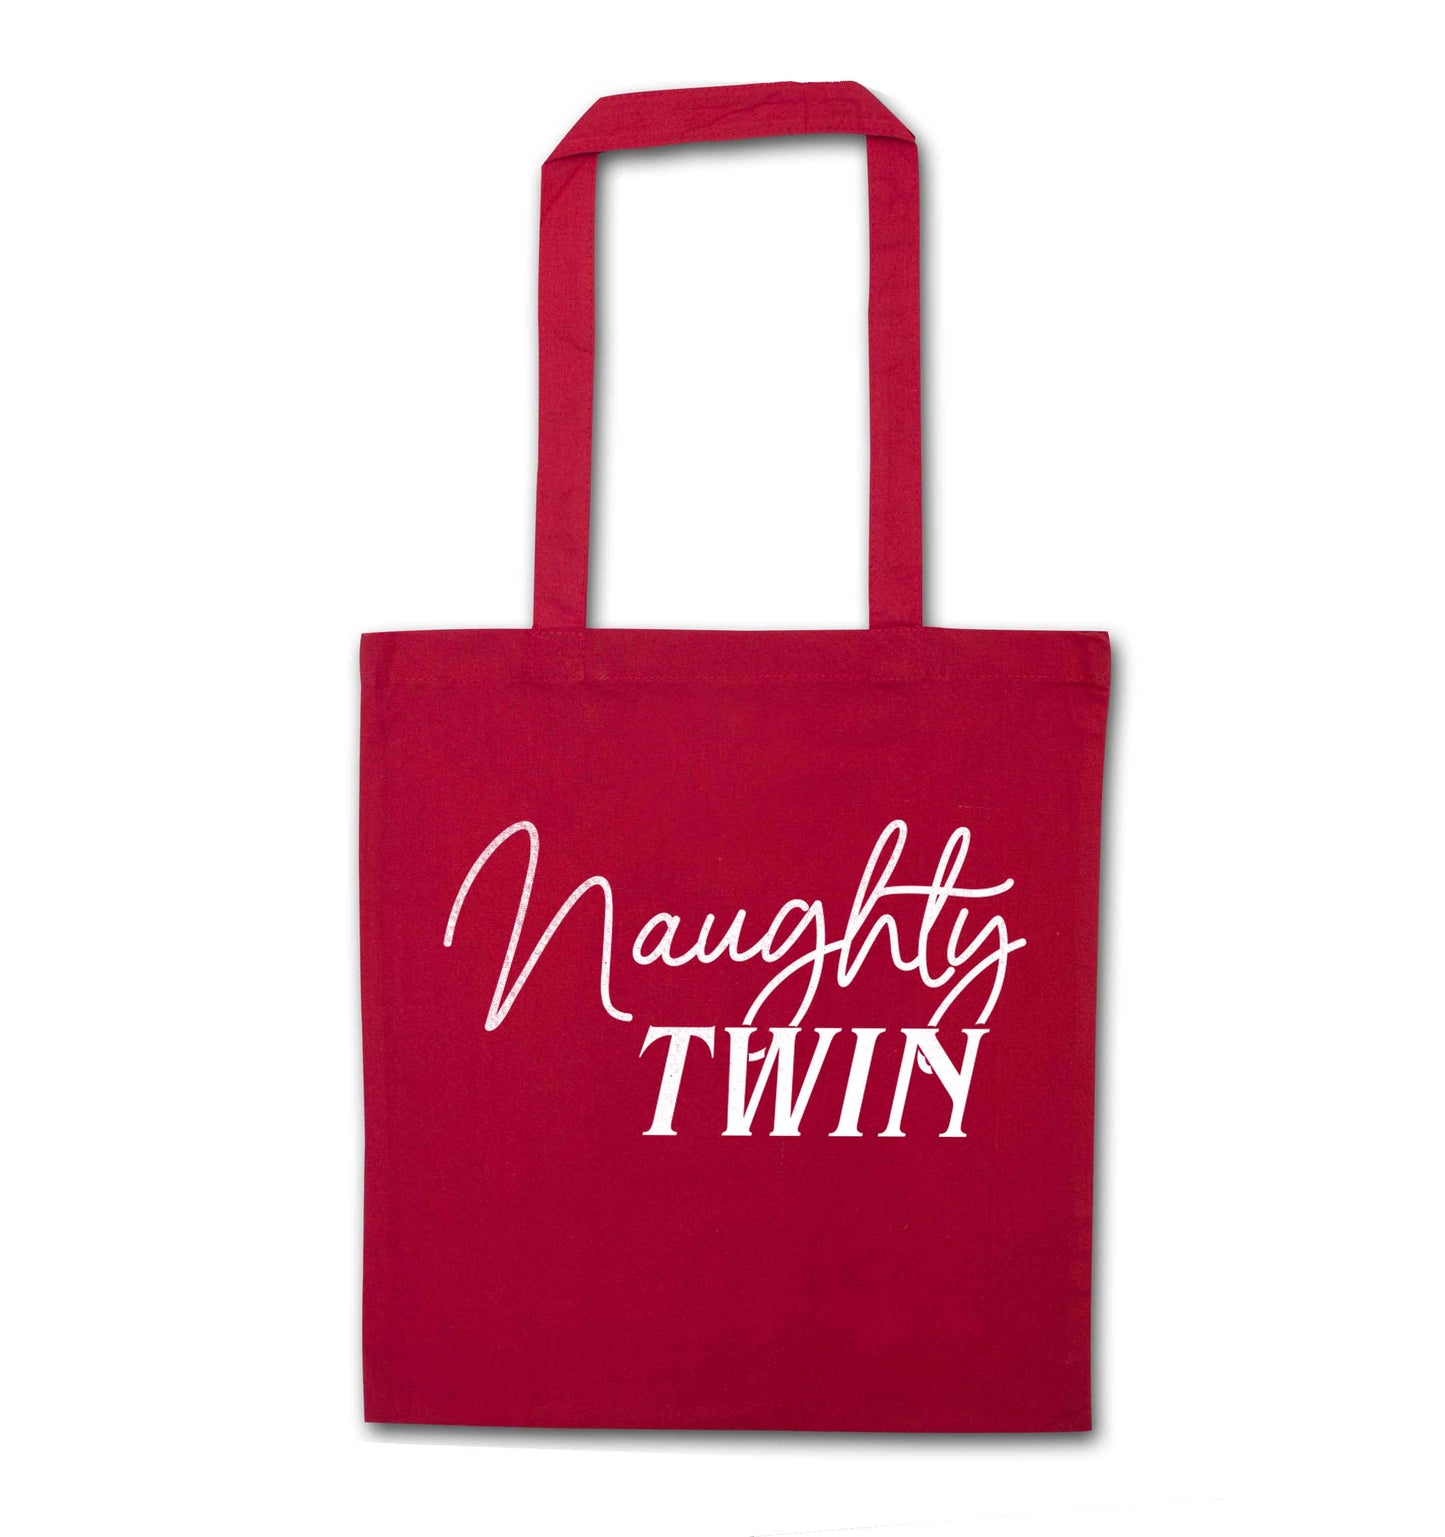 Naughty twin red tote bag